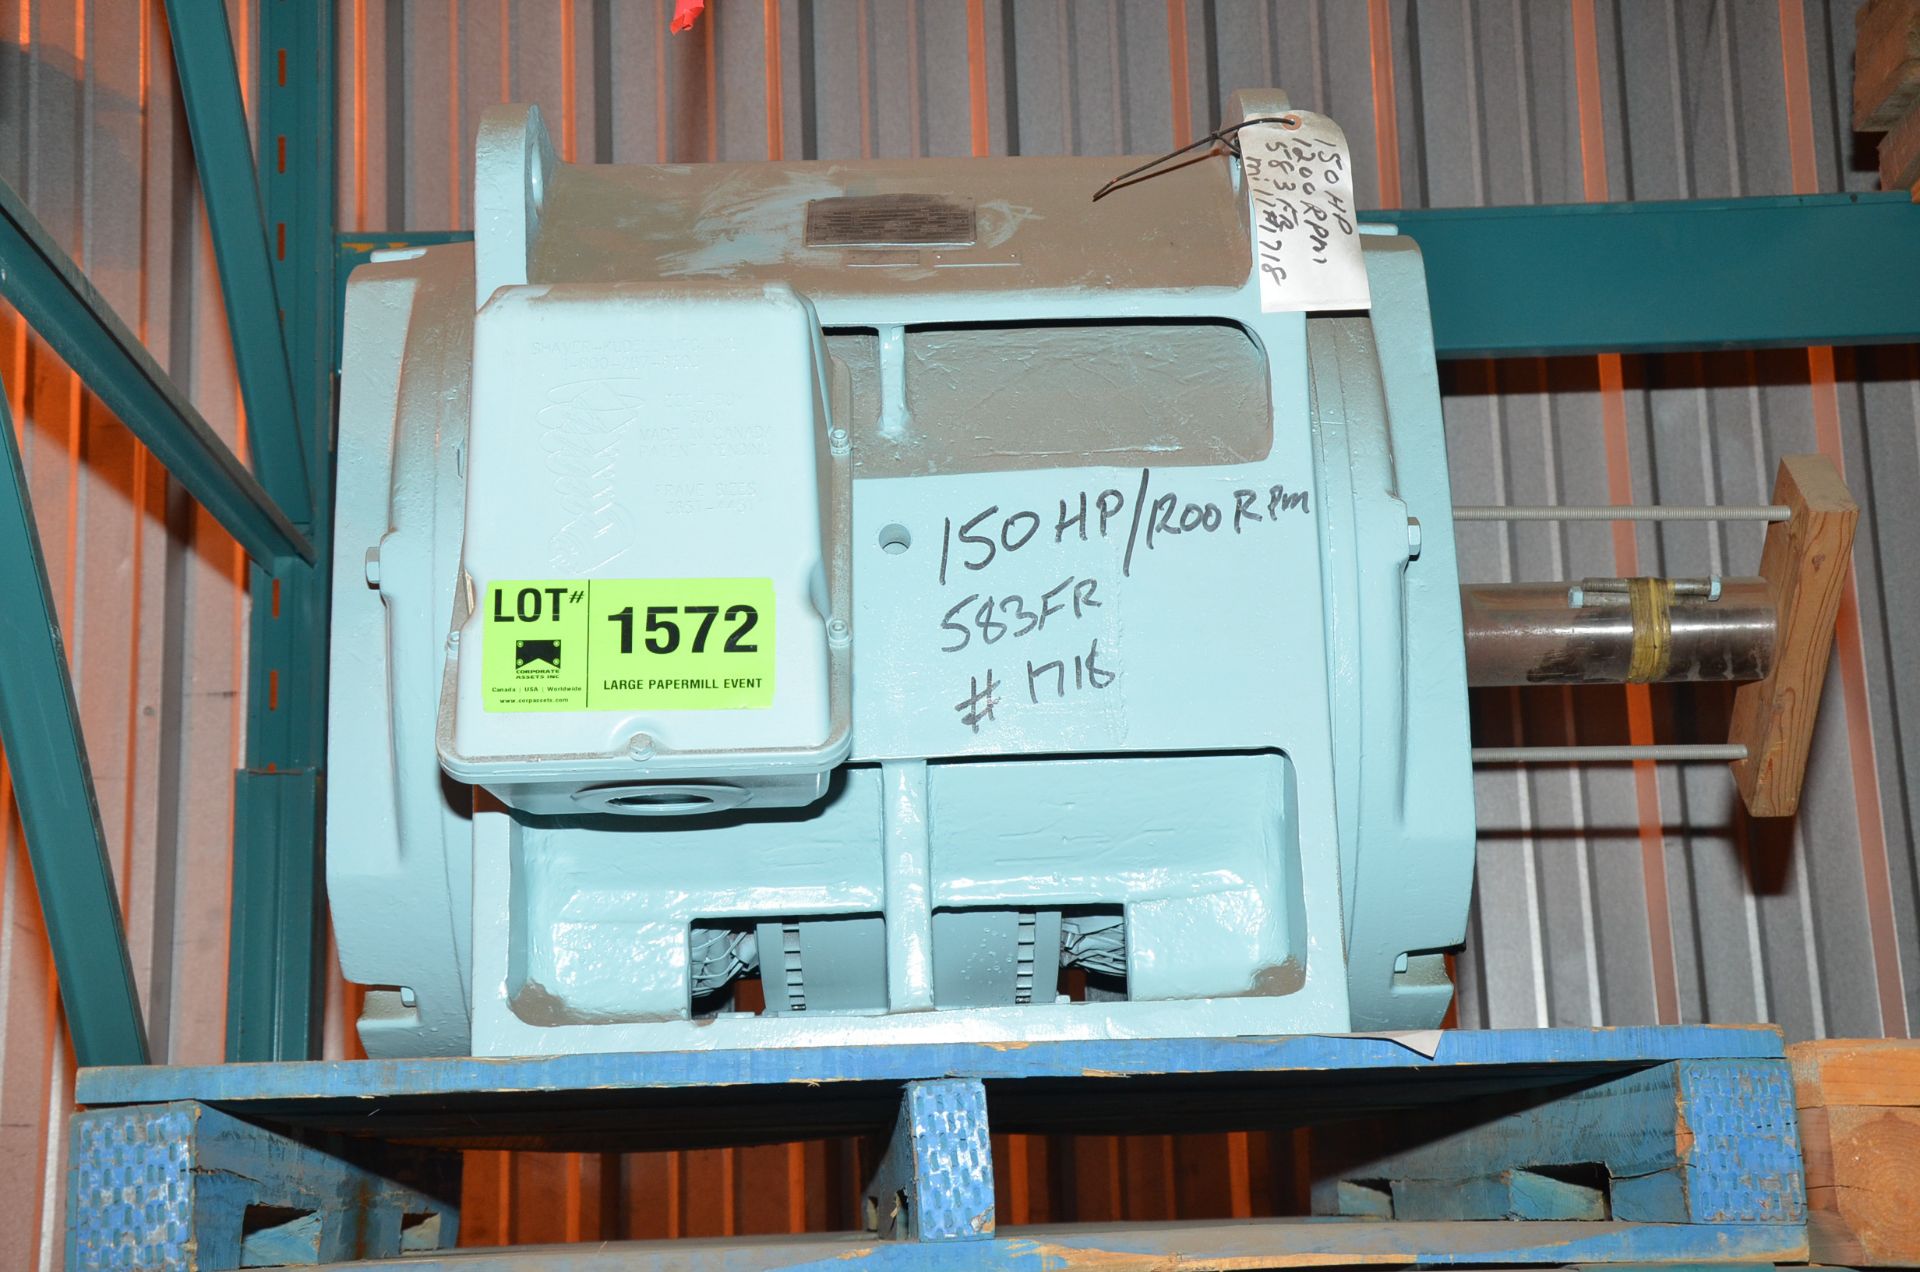 GE 150HP/1200RPM/575V ELECTRIC MOTOR, S/N N/A [RIGGING FEES FOR LOT #1572 - $60 USD PLUS